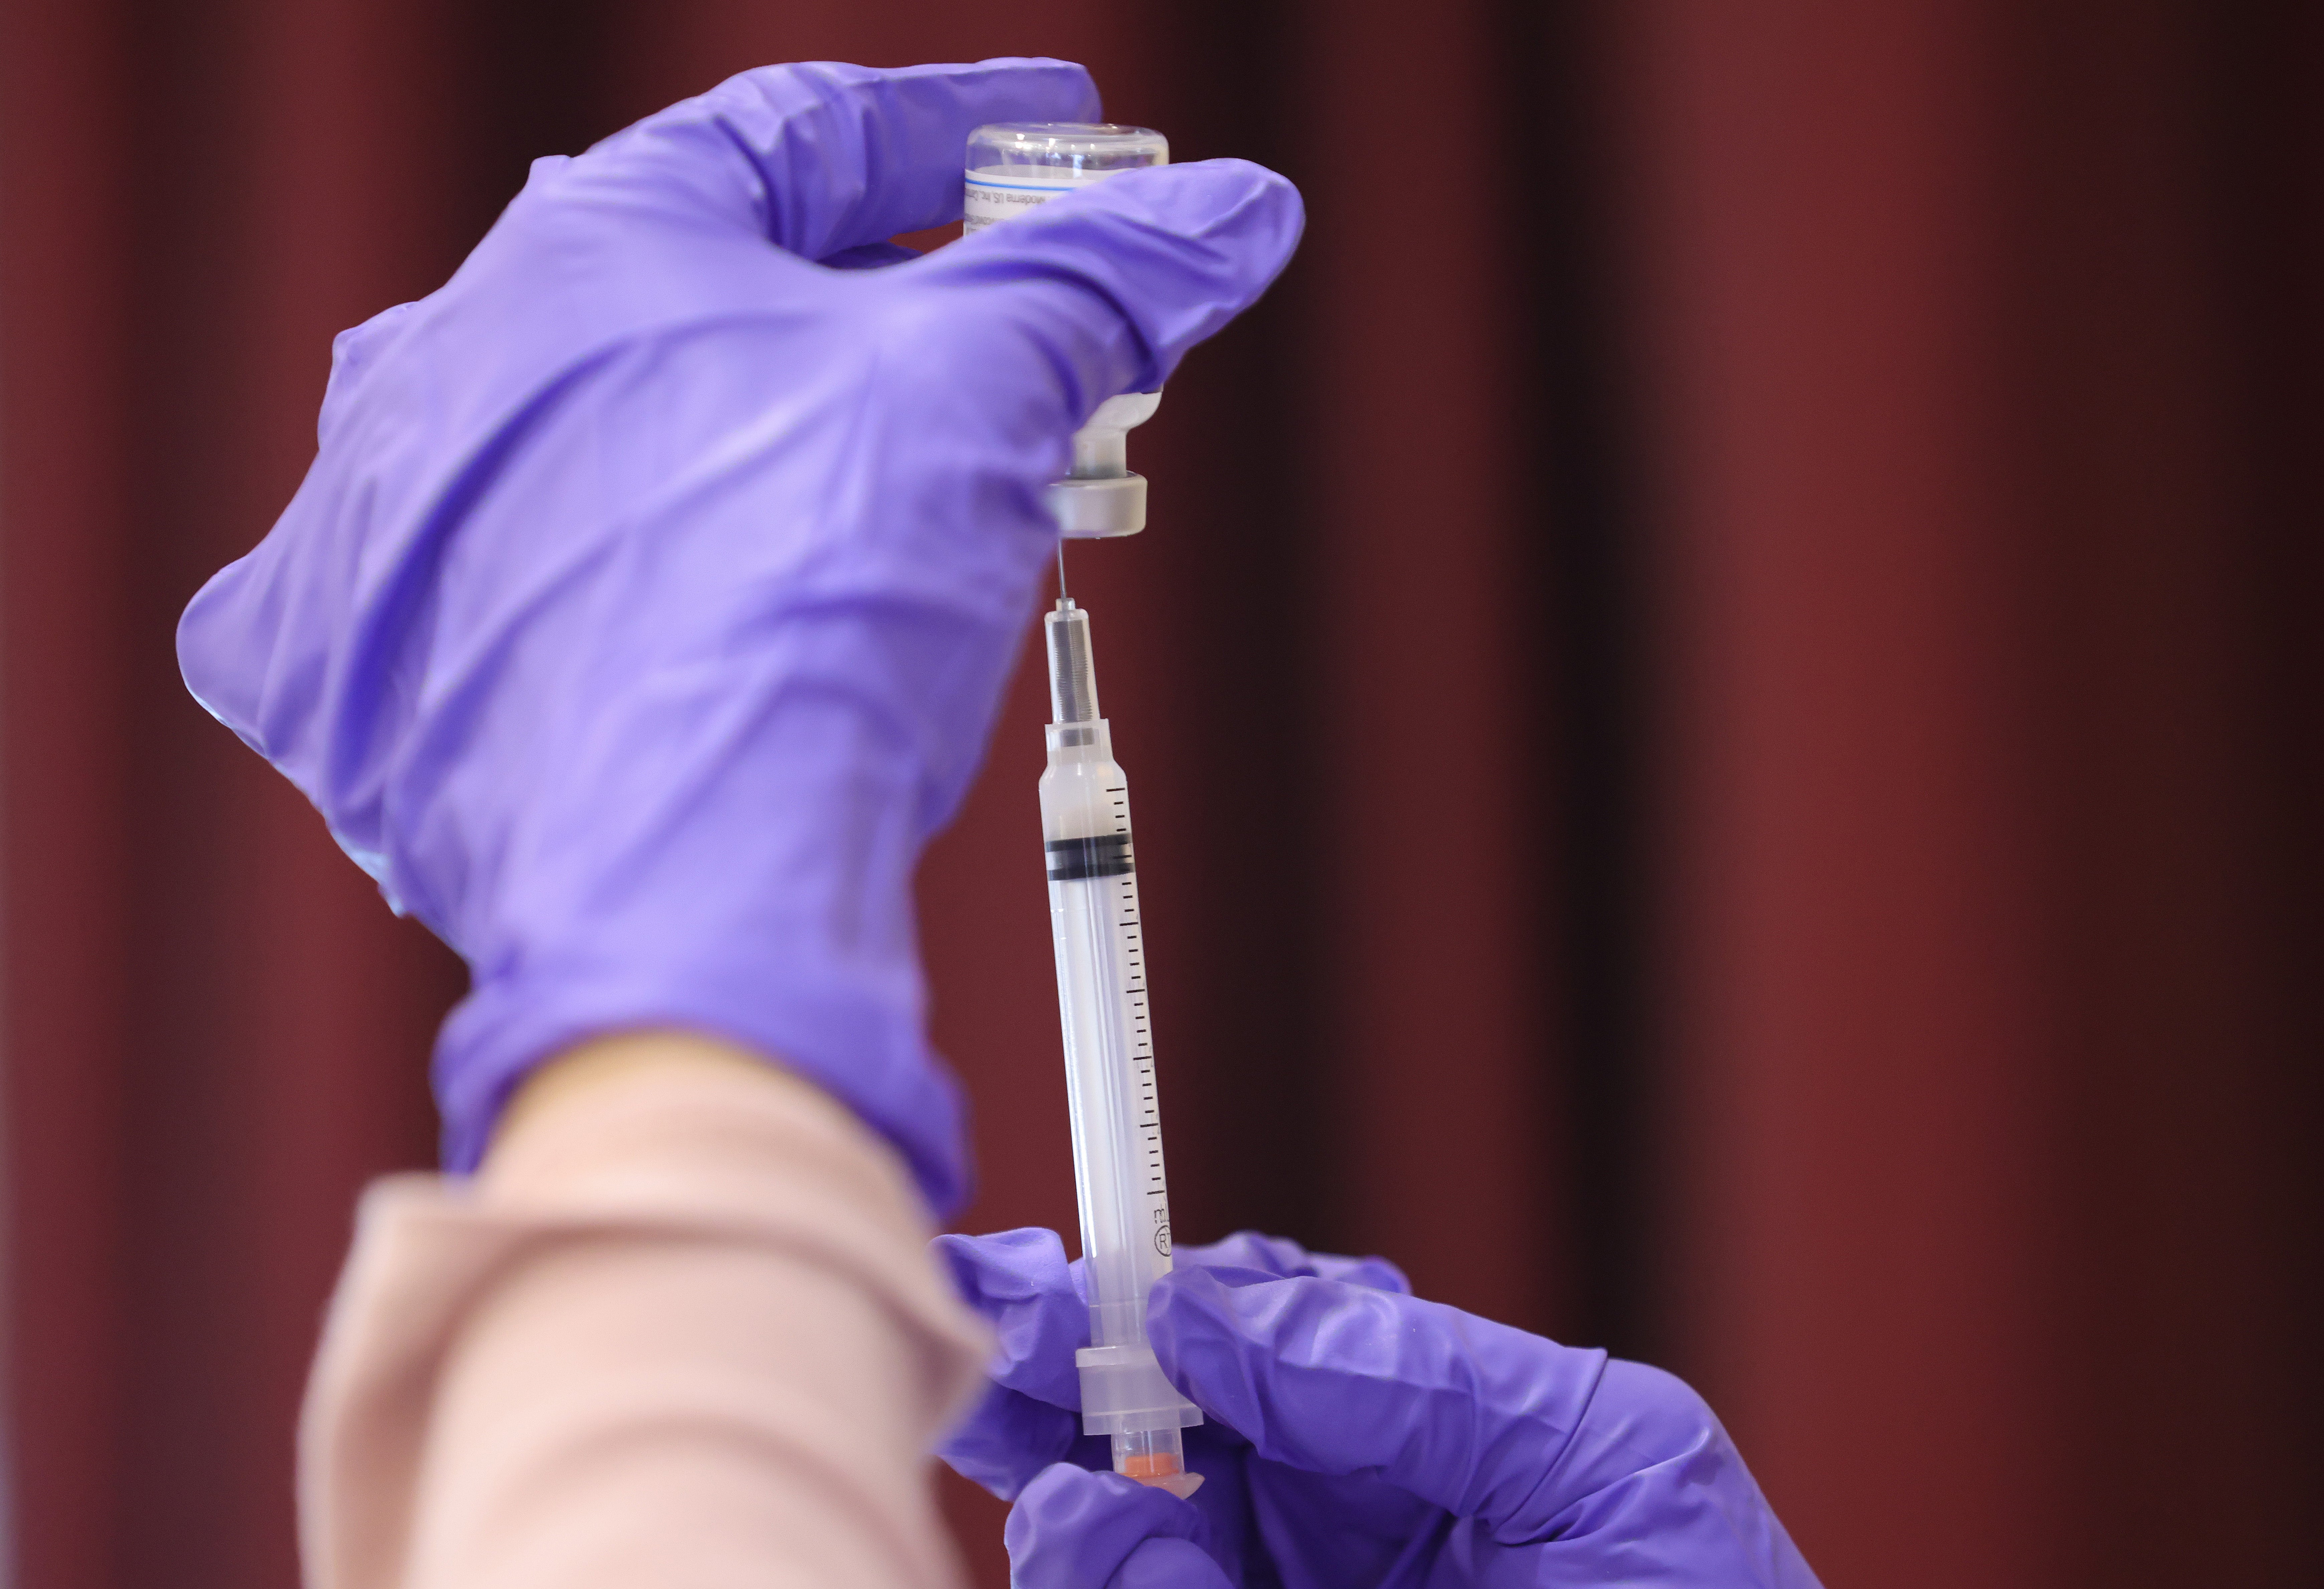 Nurses draw vaccine doses from a vial as Maryland residents receive their second dose of the Moderna coronavirus vaccine at the Cameron Grove Community Center on 25 March 2021 in Bowie, Maryland